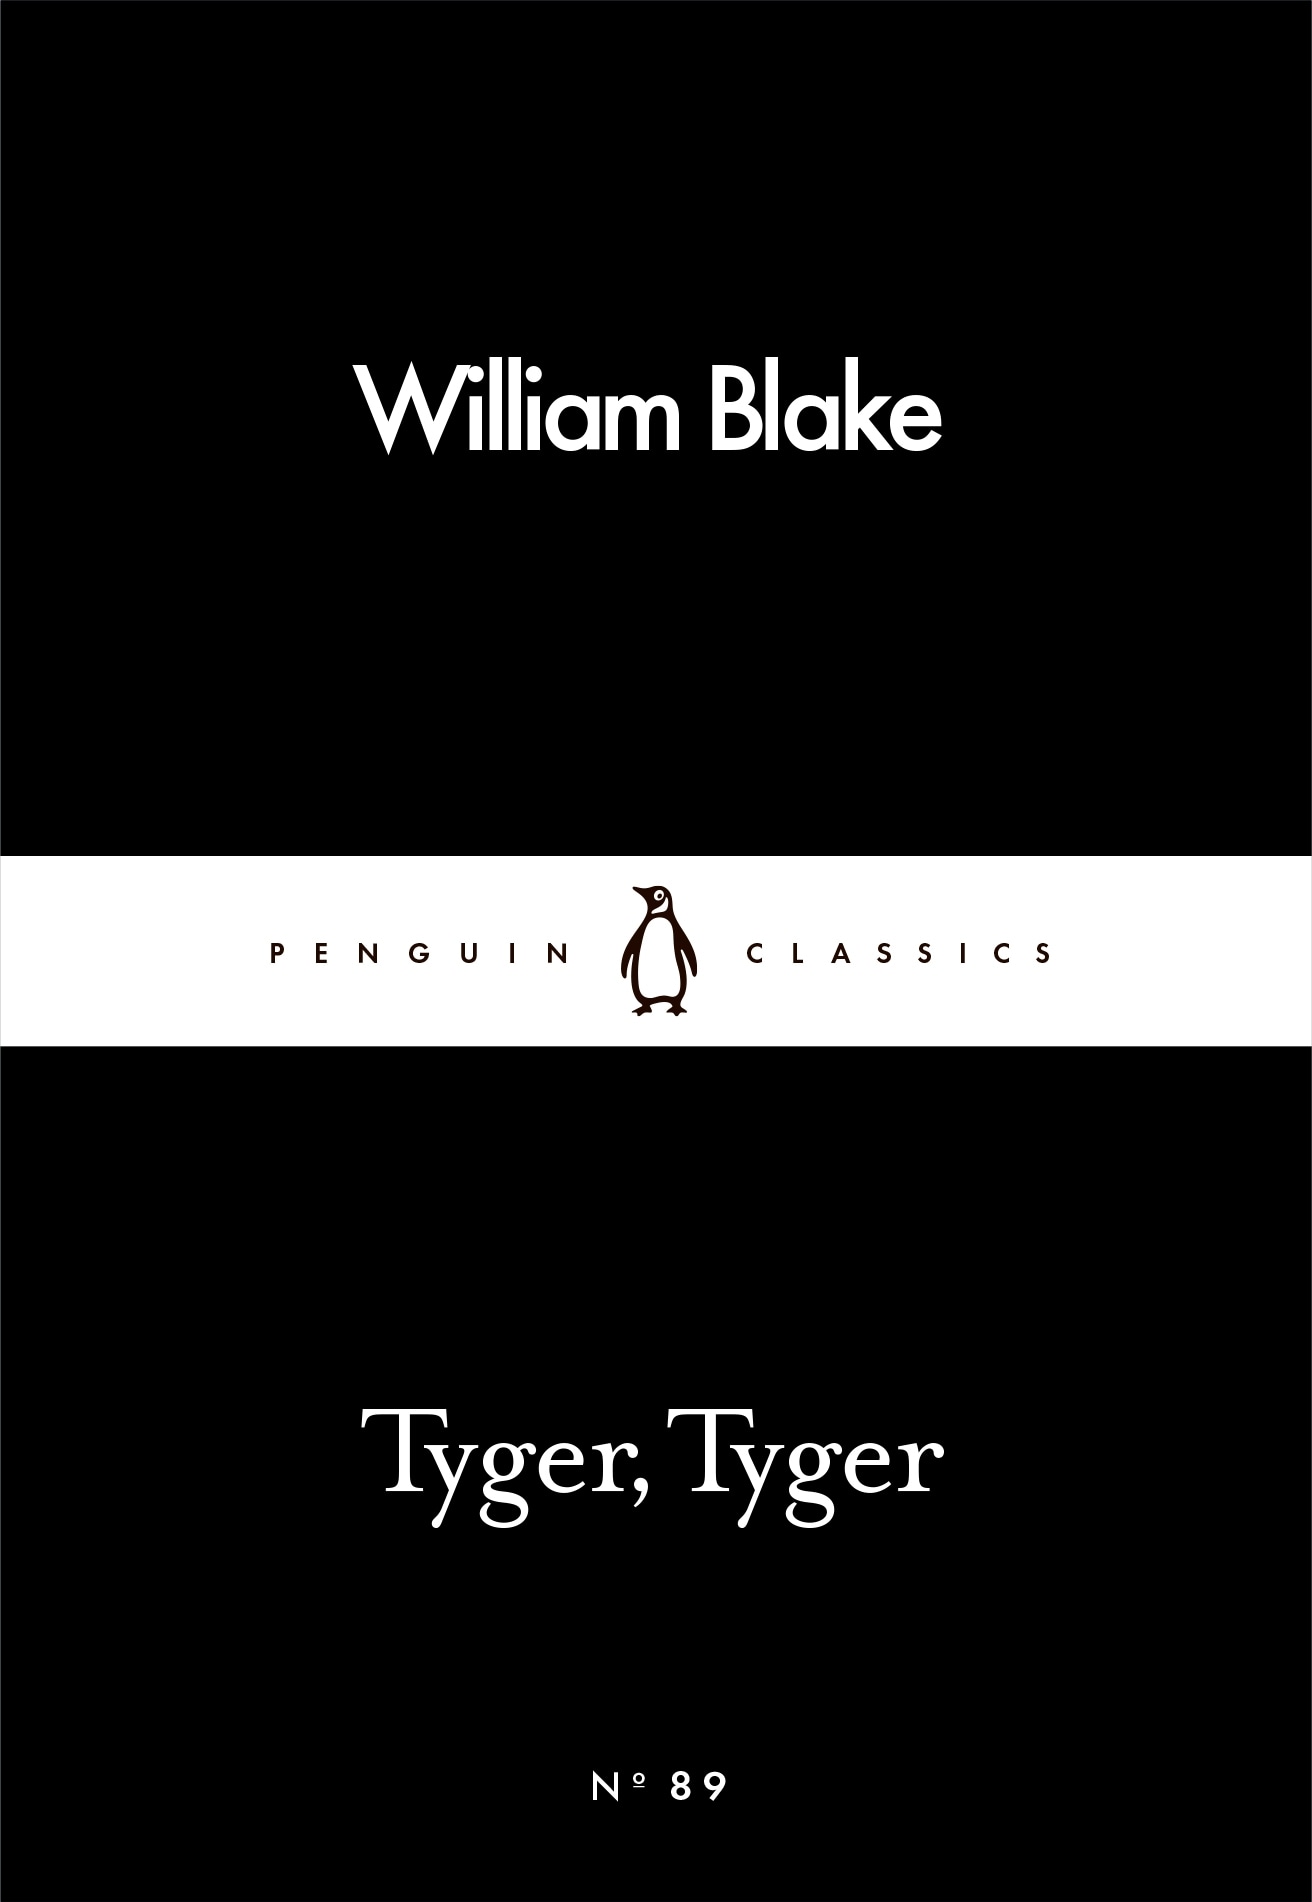 Book “Tyger, Tyger” by William Blake — March 3, 2016